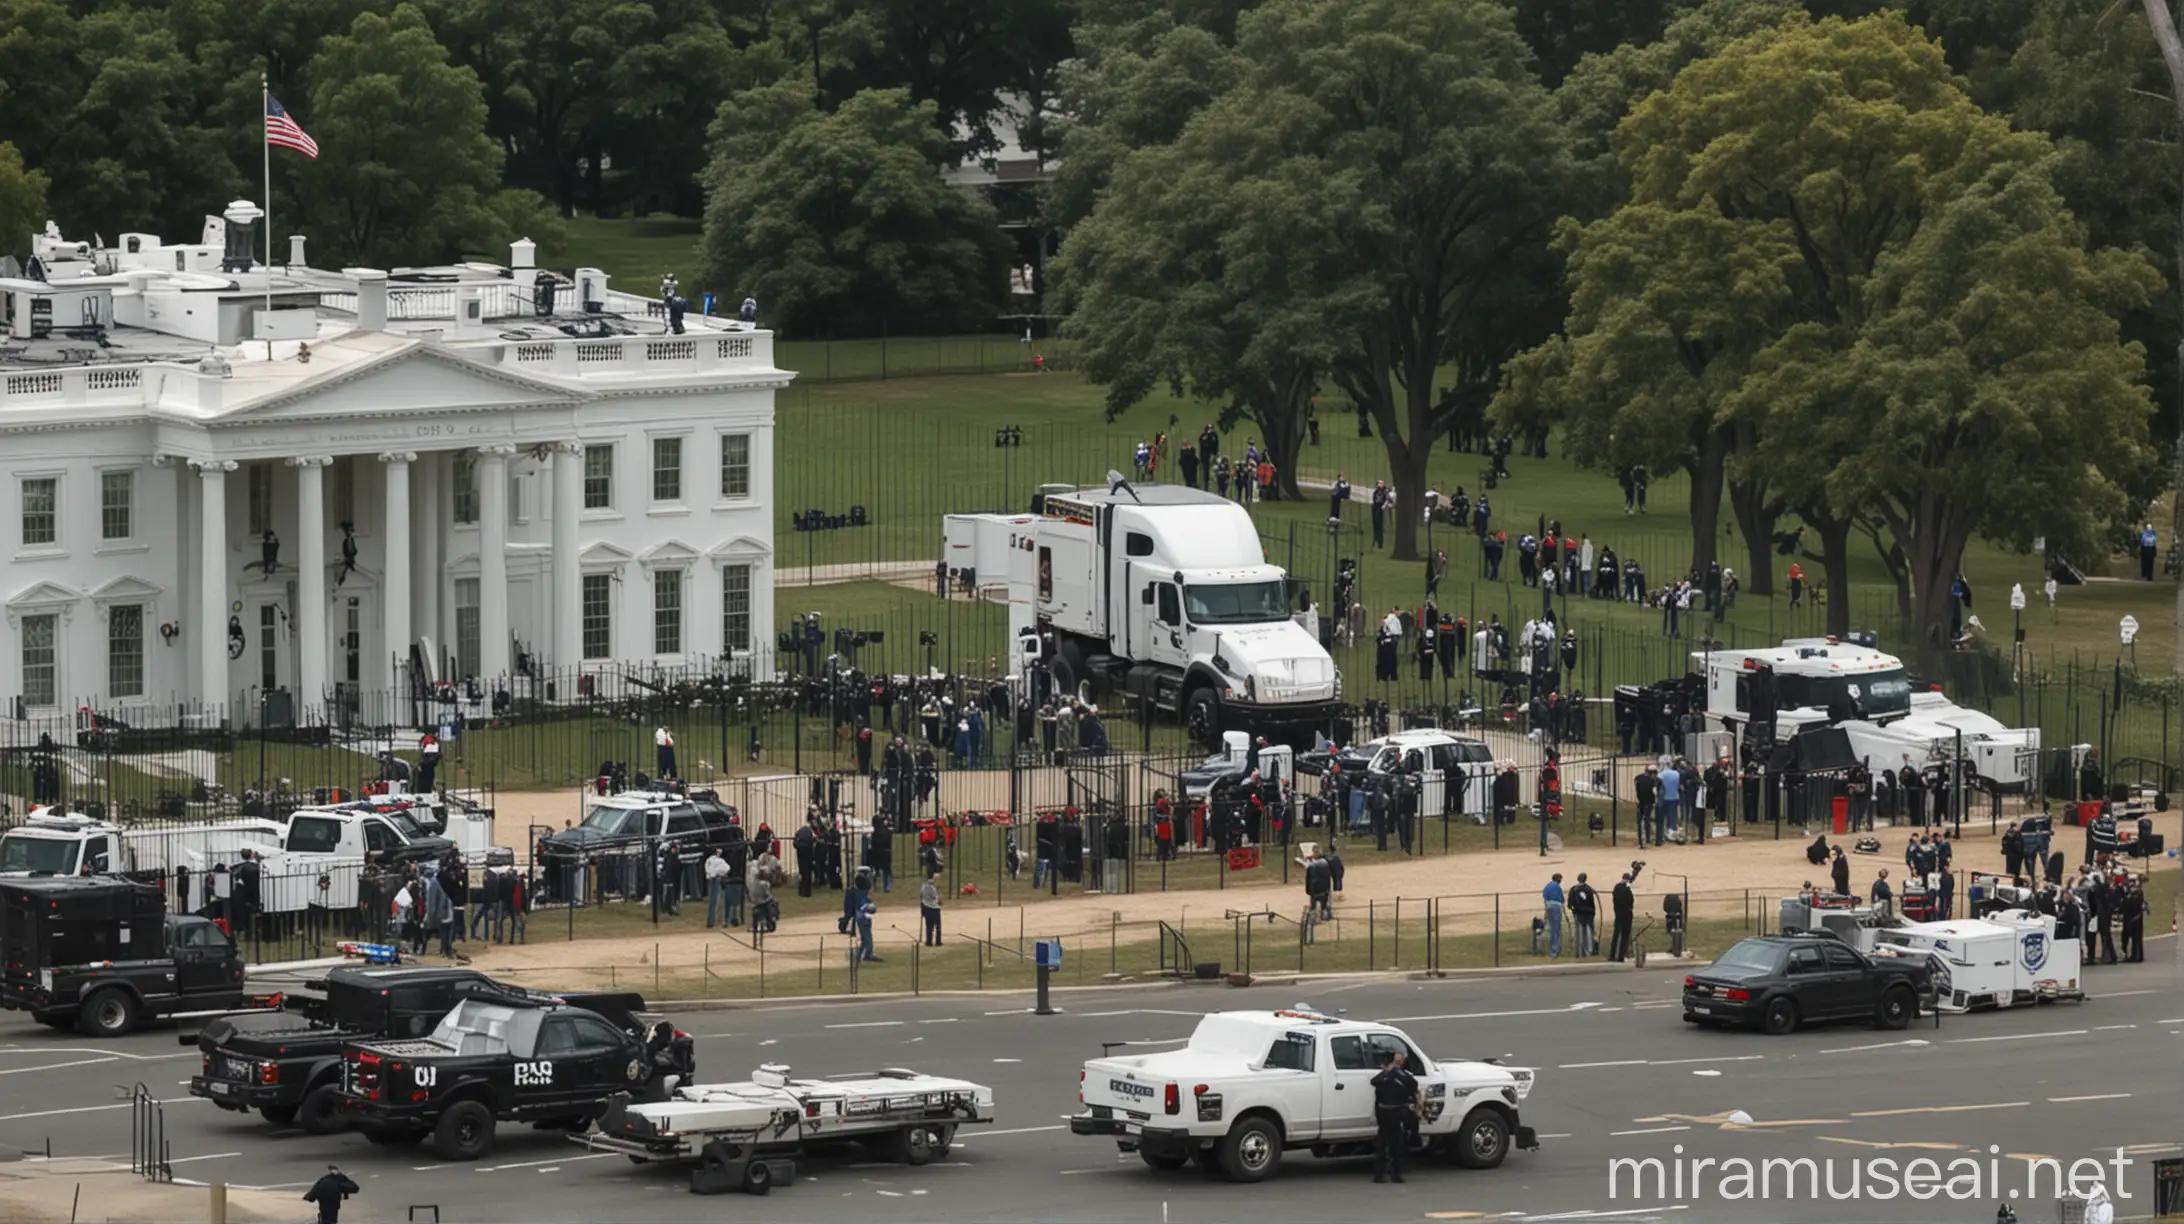 a big truck park in front of white house (US), Police near by with gun, one man arrested